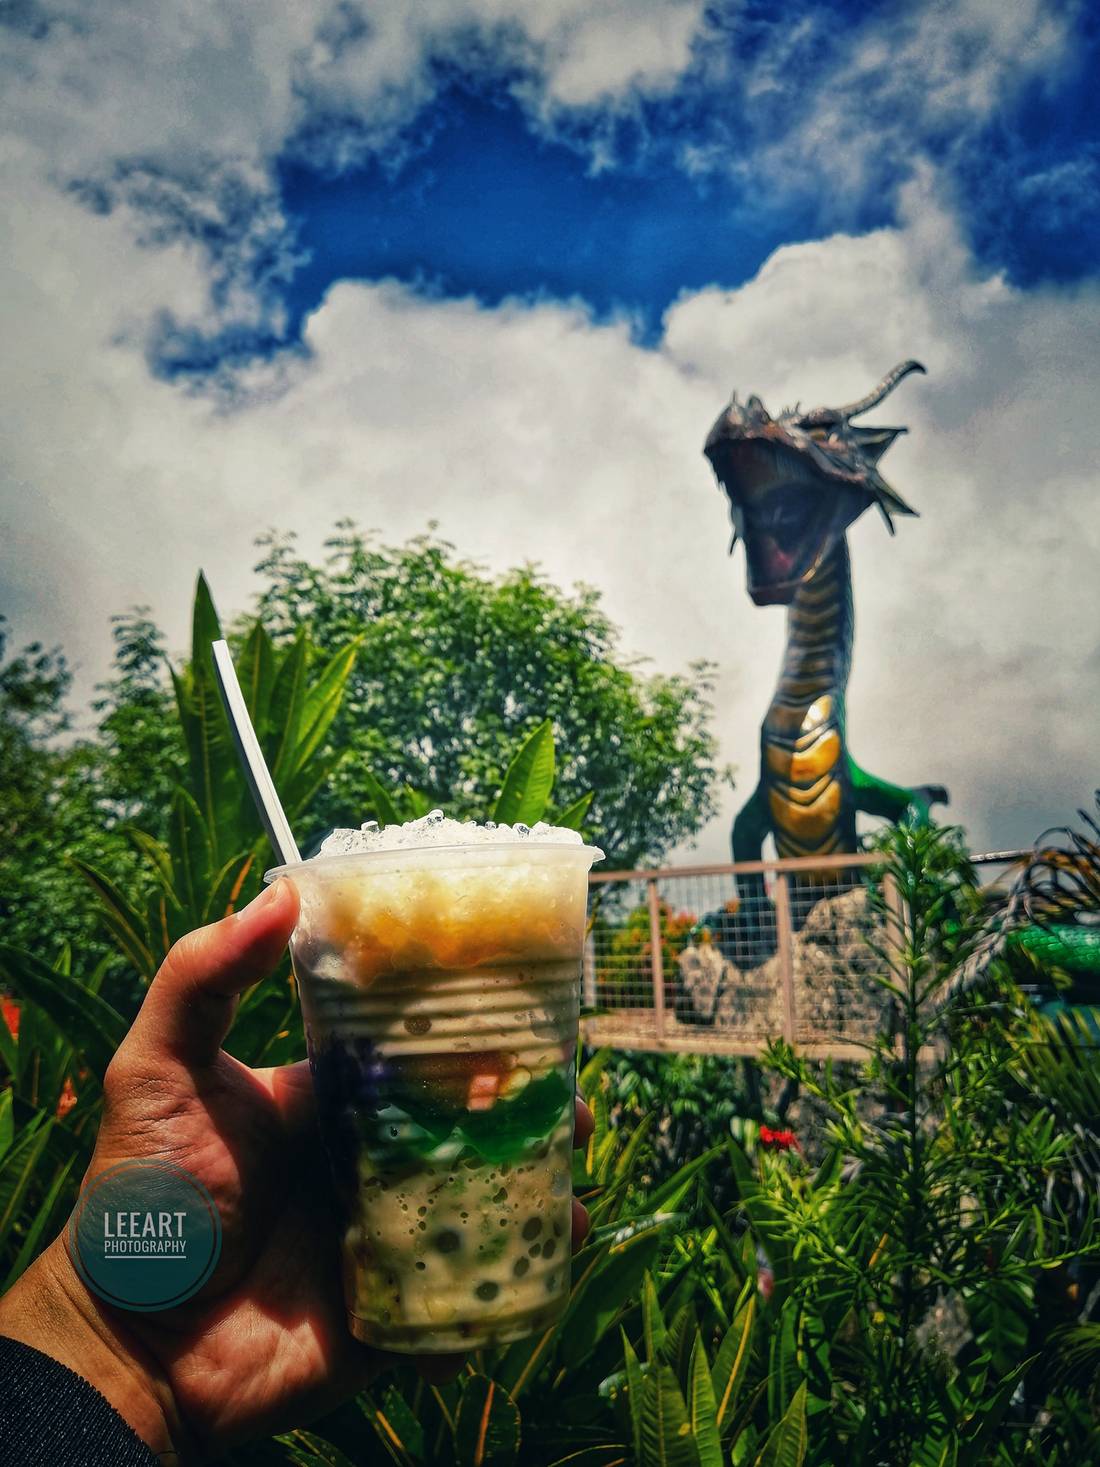 Cheers to you, Dragon. You needed something to cool you off. Here’s a halo-halo for you.